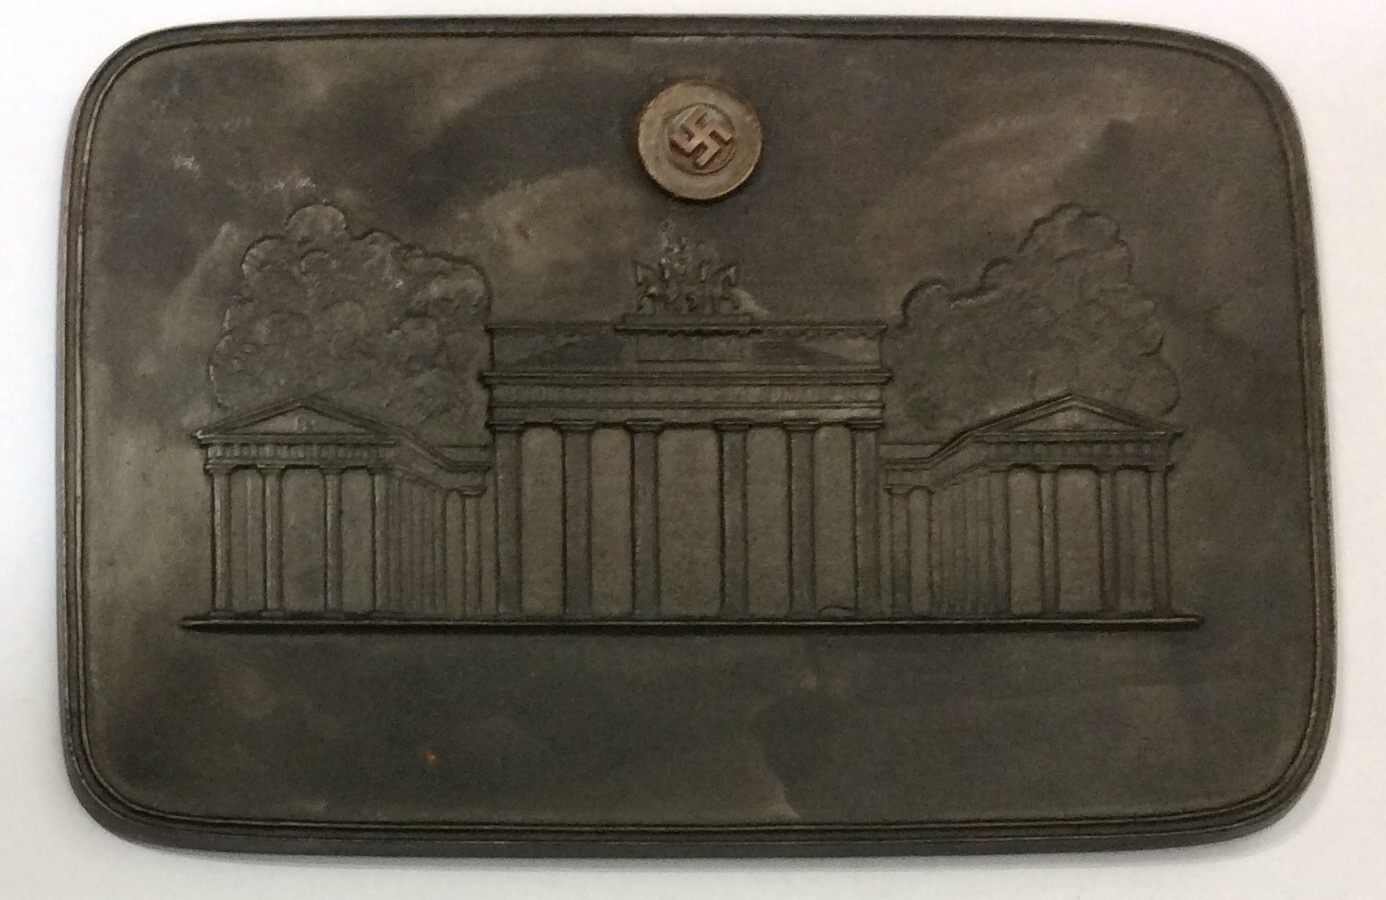 A WORLD WAR II GERMAN CAST IRON BRANDENBURG GATE PLAQUE Relief cast of the gate with a Nazi insignia